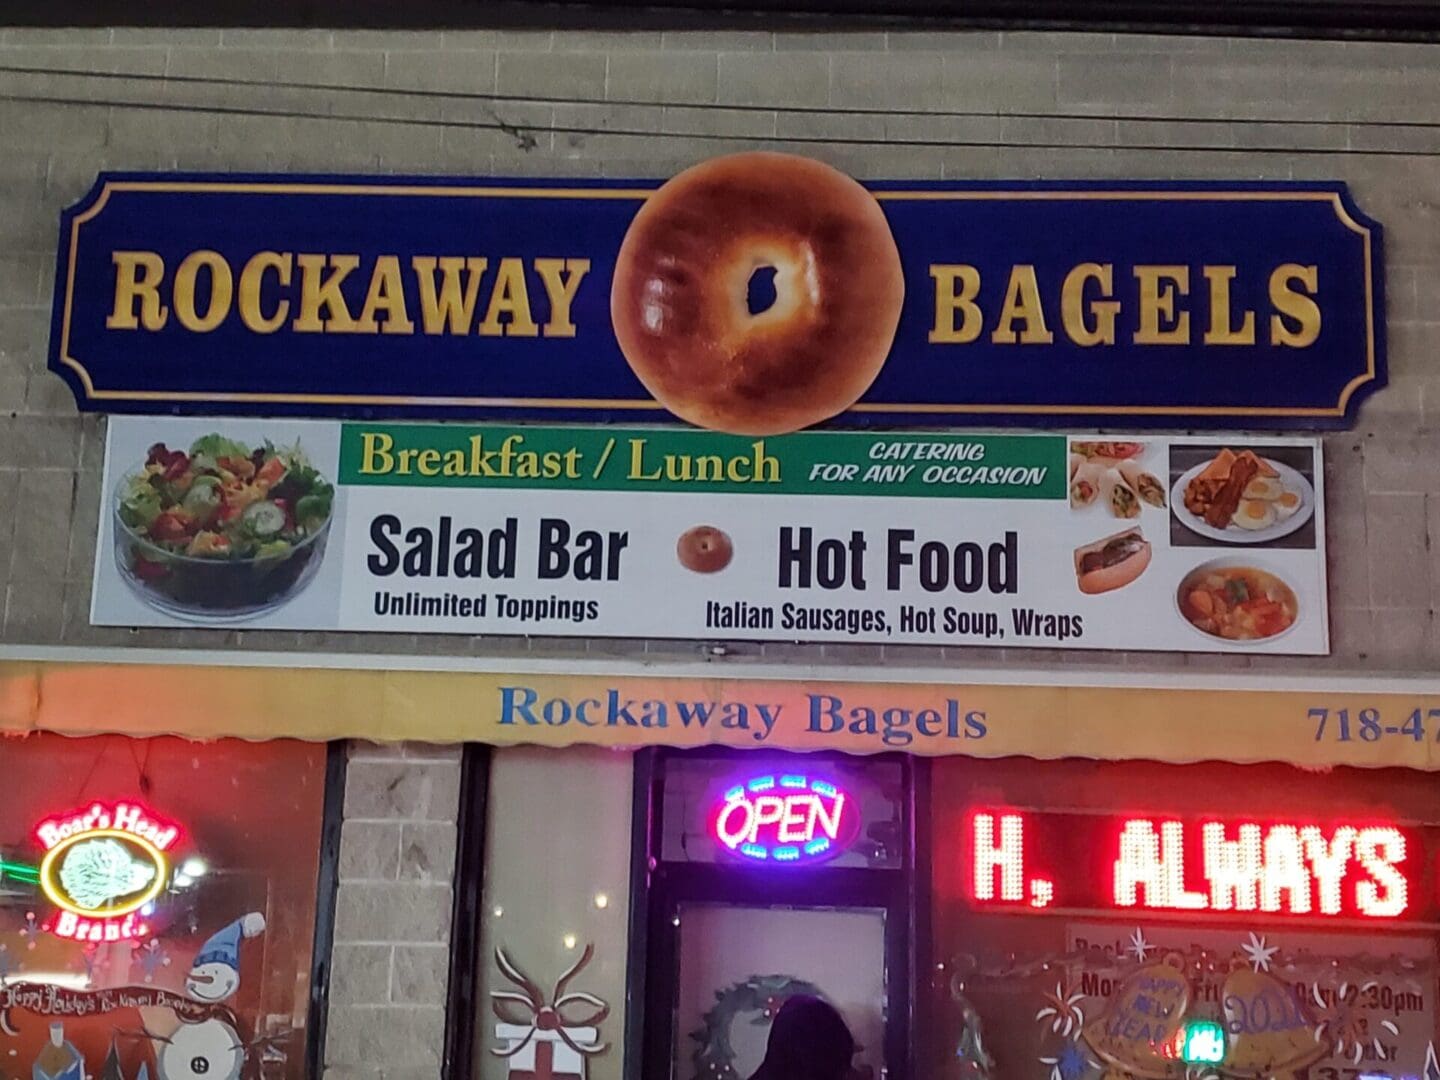 A sign for rockaway bagels in front of the building.